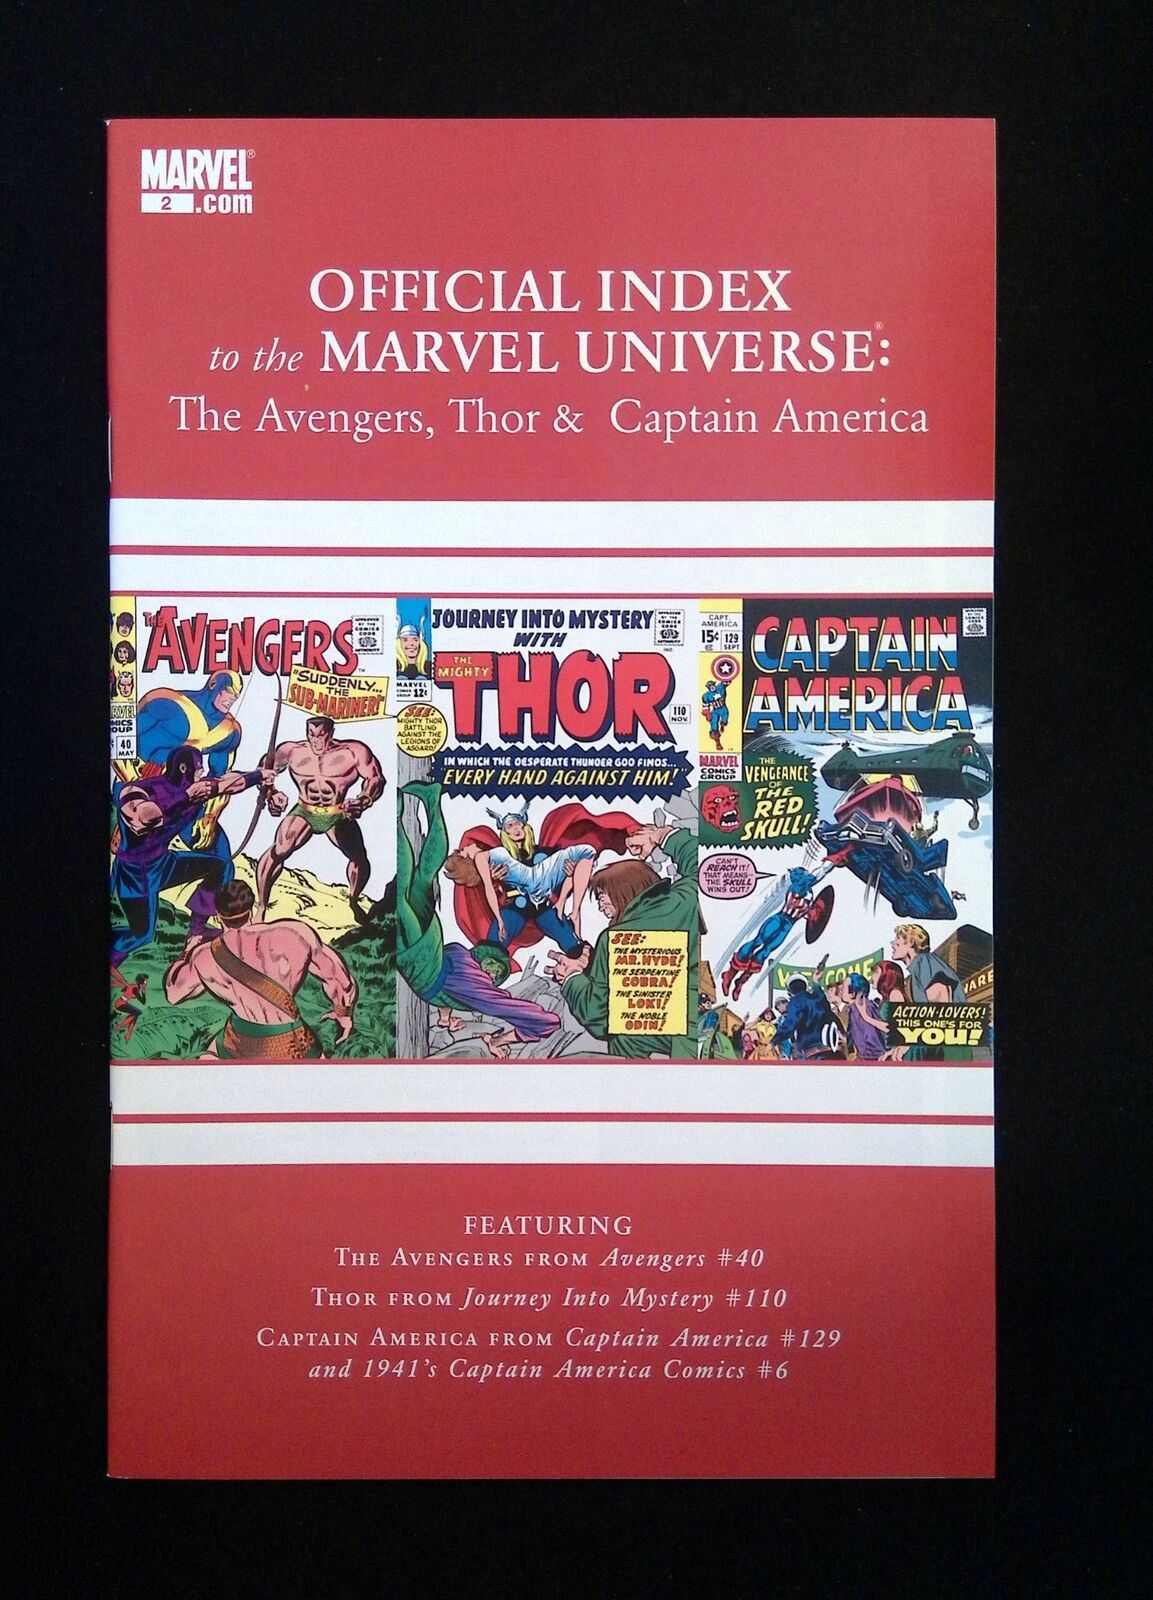 OFFICIAL INDEX MARVEL UNIVERSE AVENGERS THOR CAPT. AMERICA #2 2010 NM VARIANT